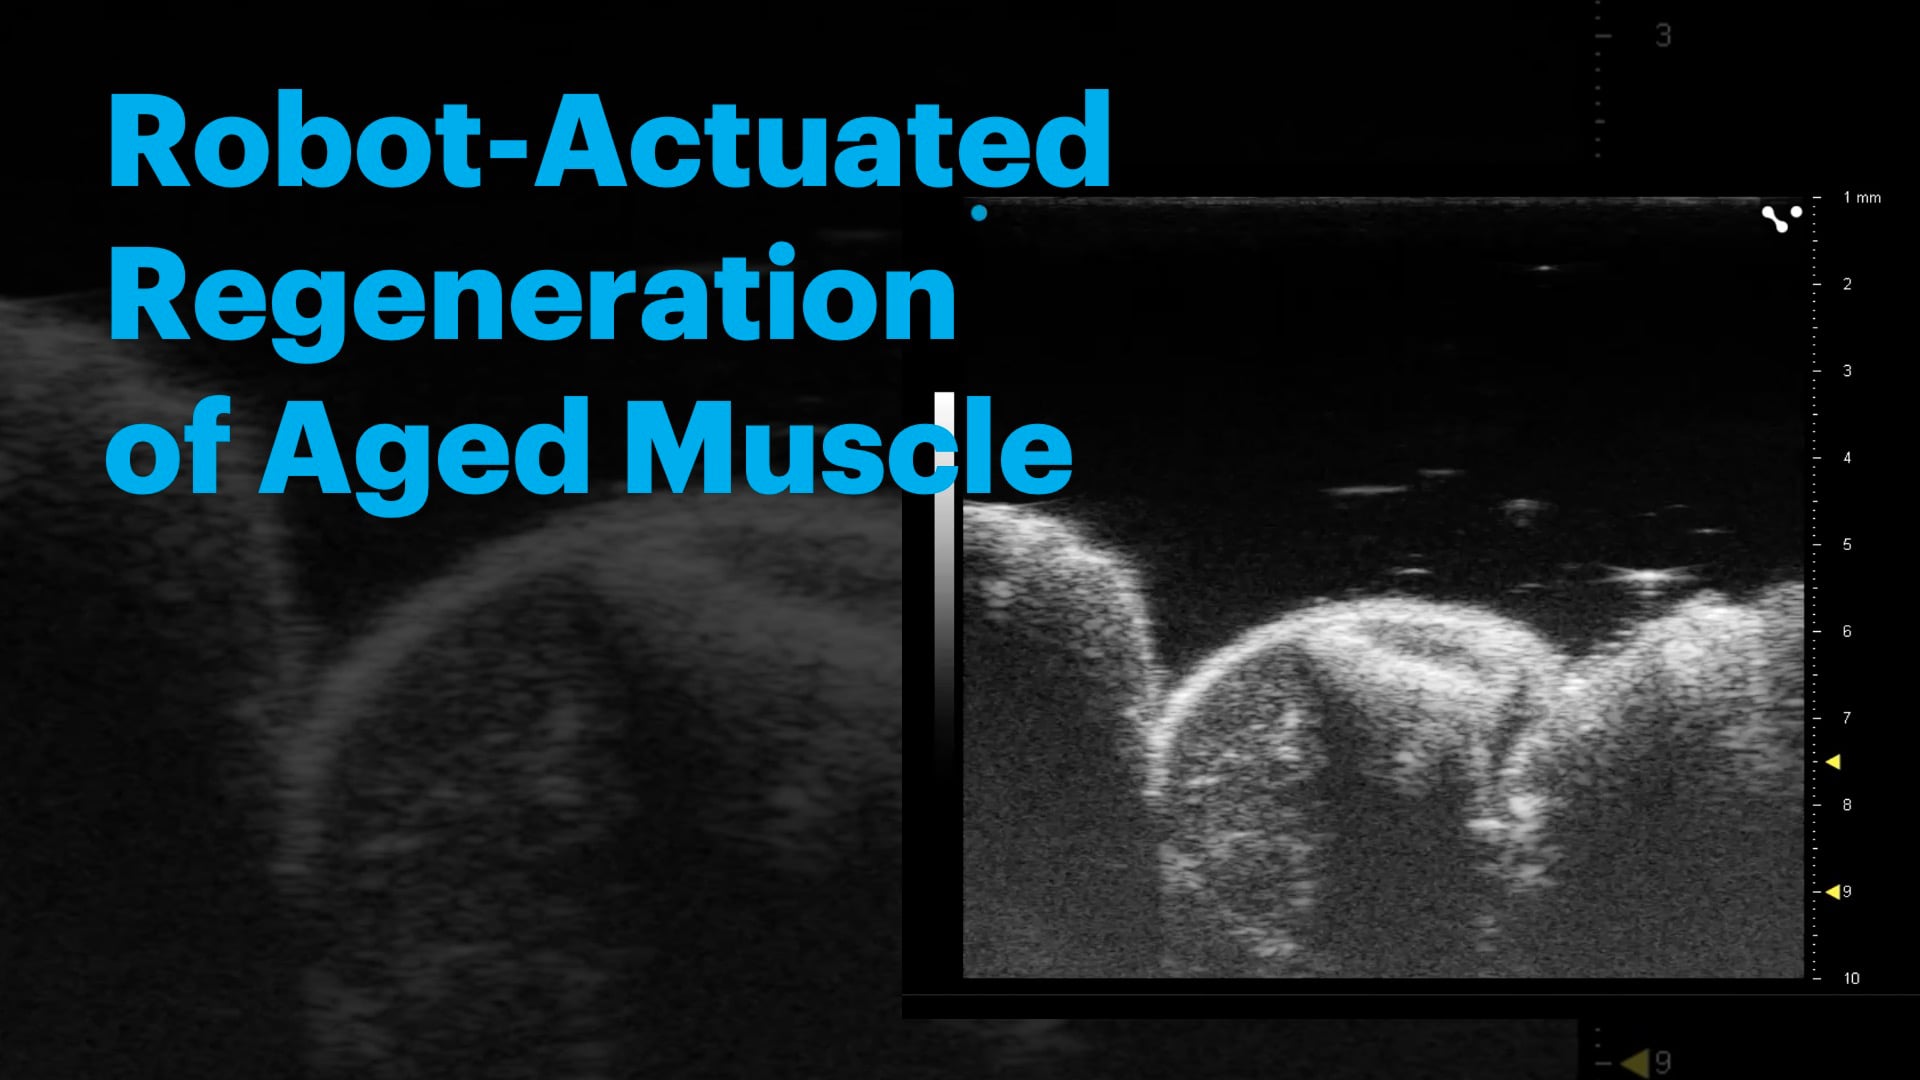 Robot-Actuated Regeneration of Aged Muscle